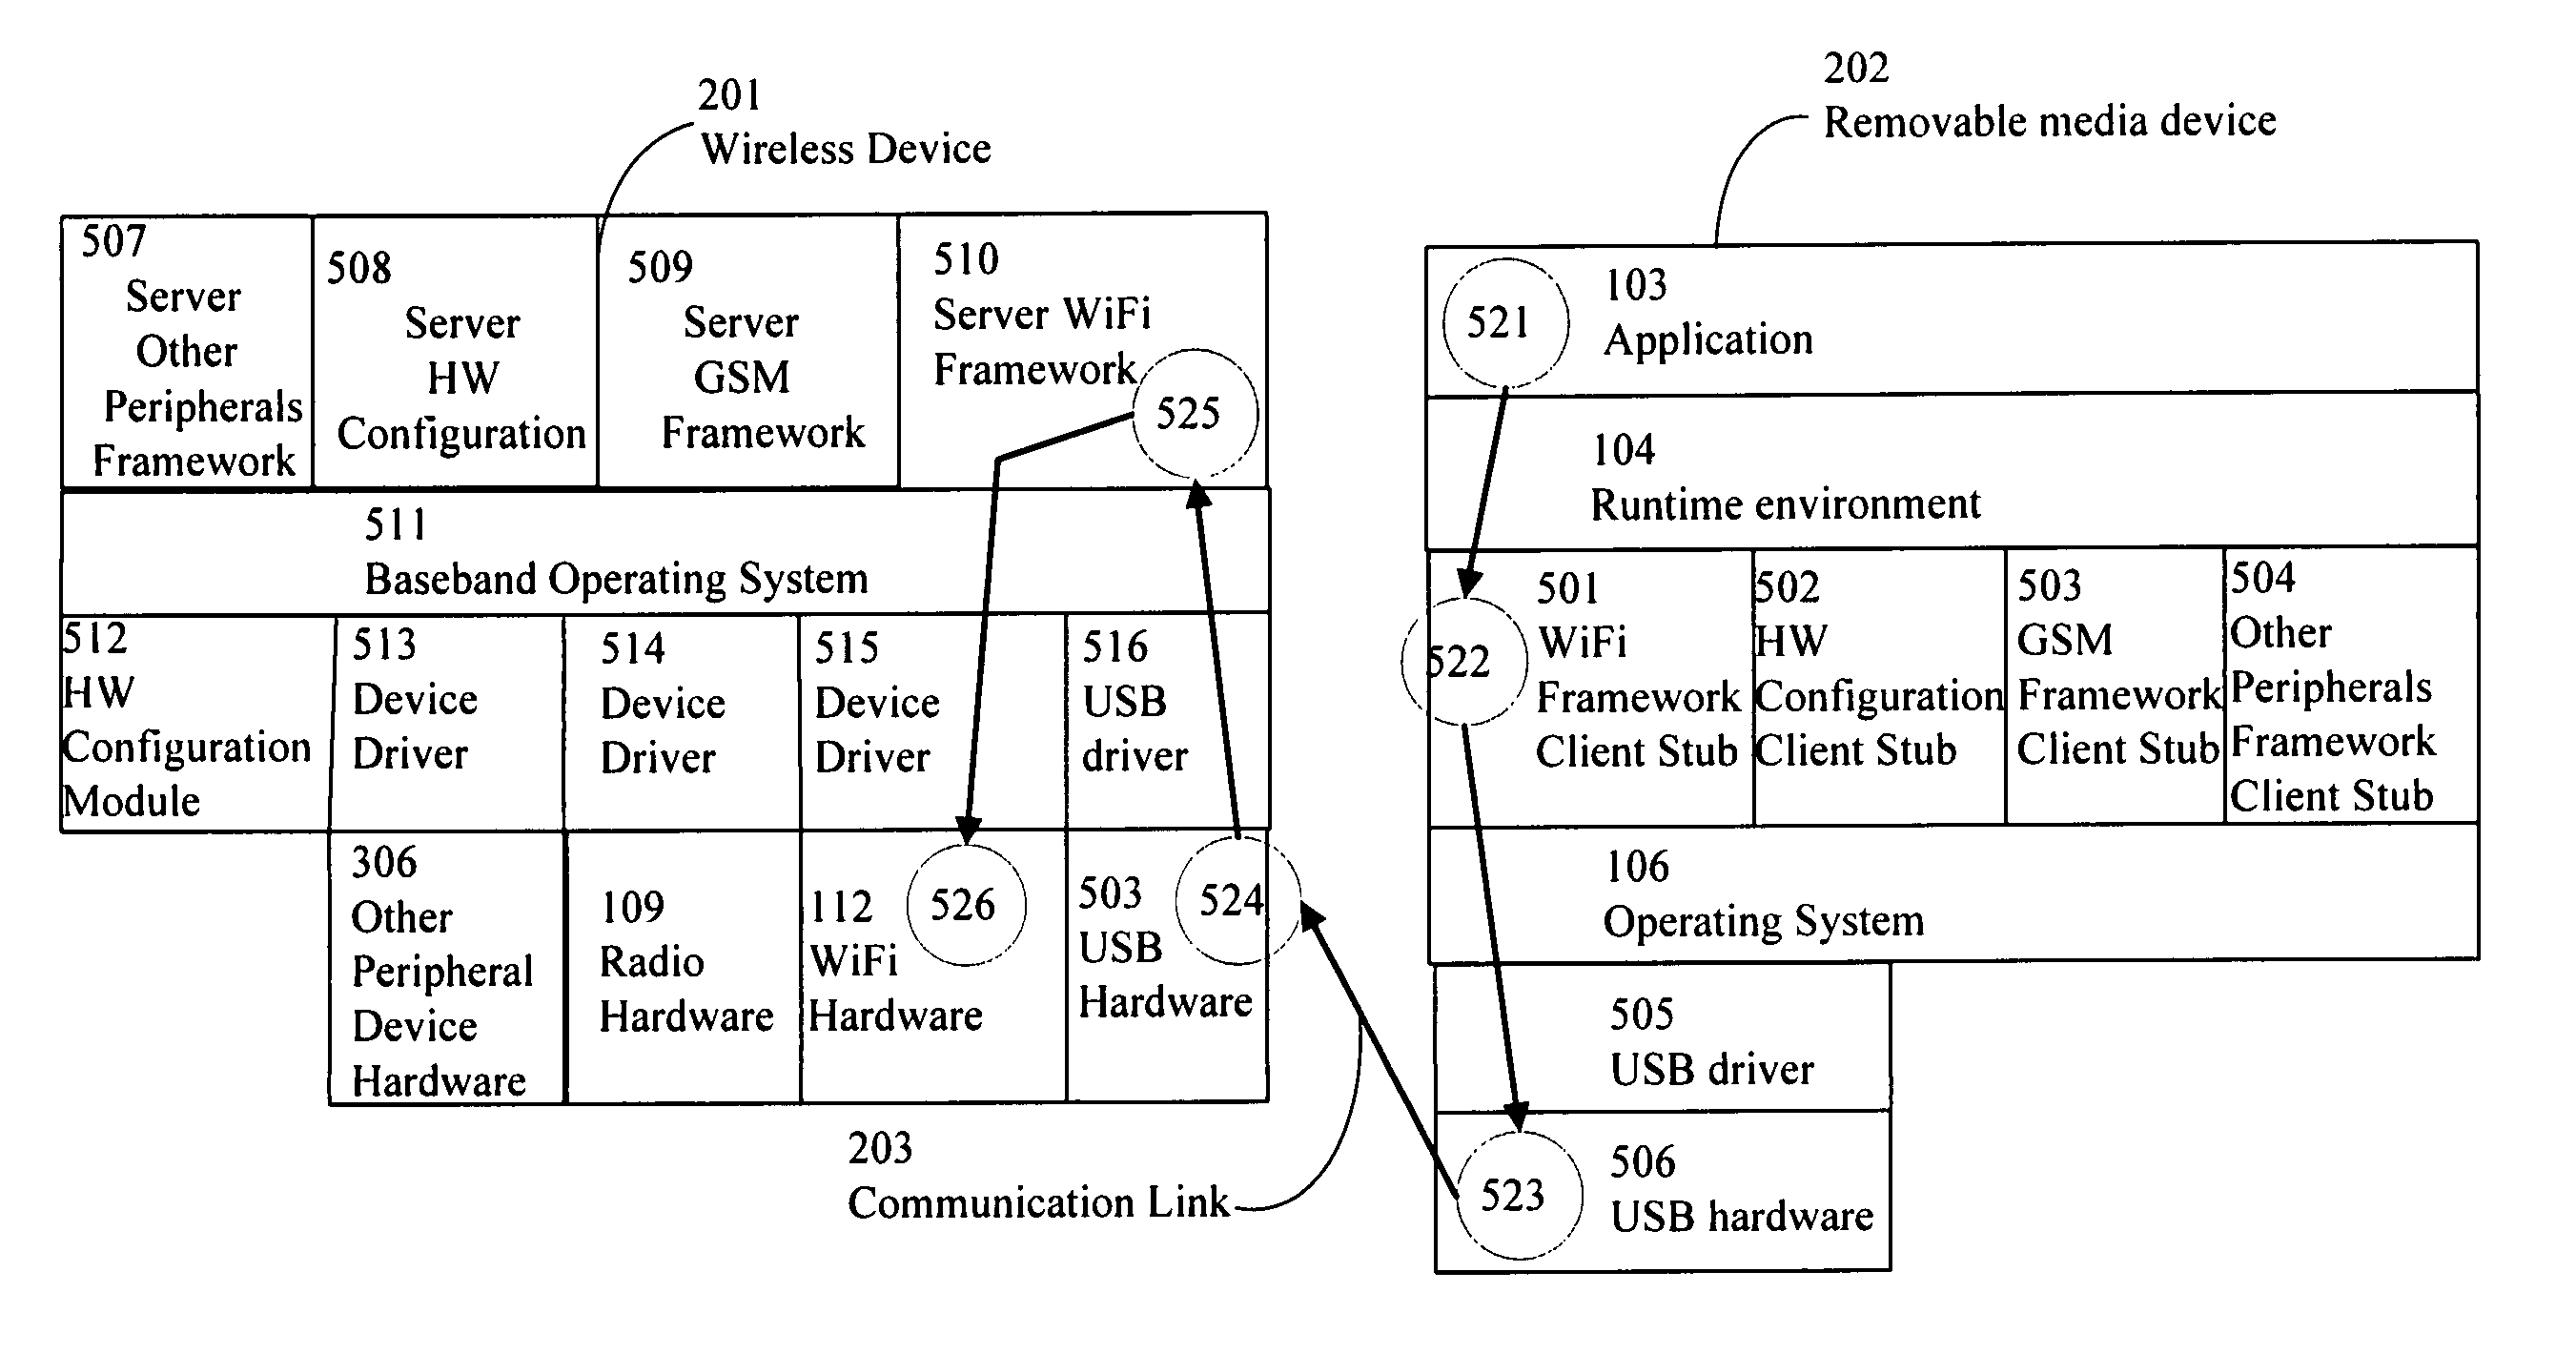 System and method for remotely operating a wireless device using a server and client architecture